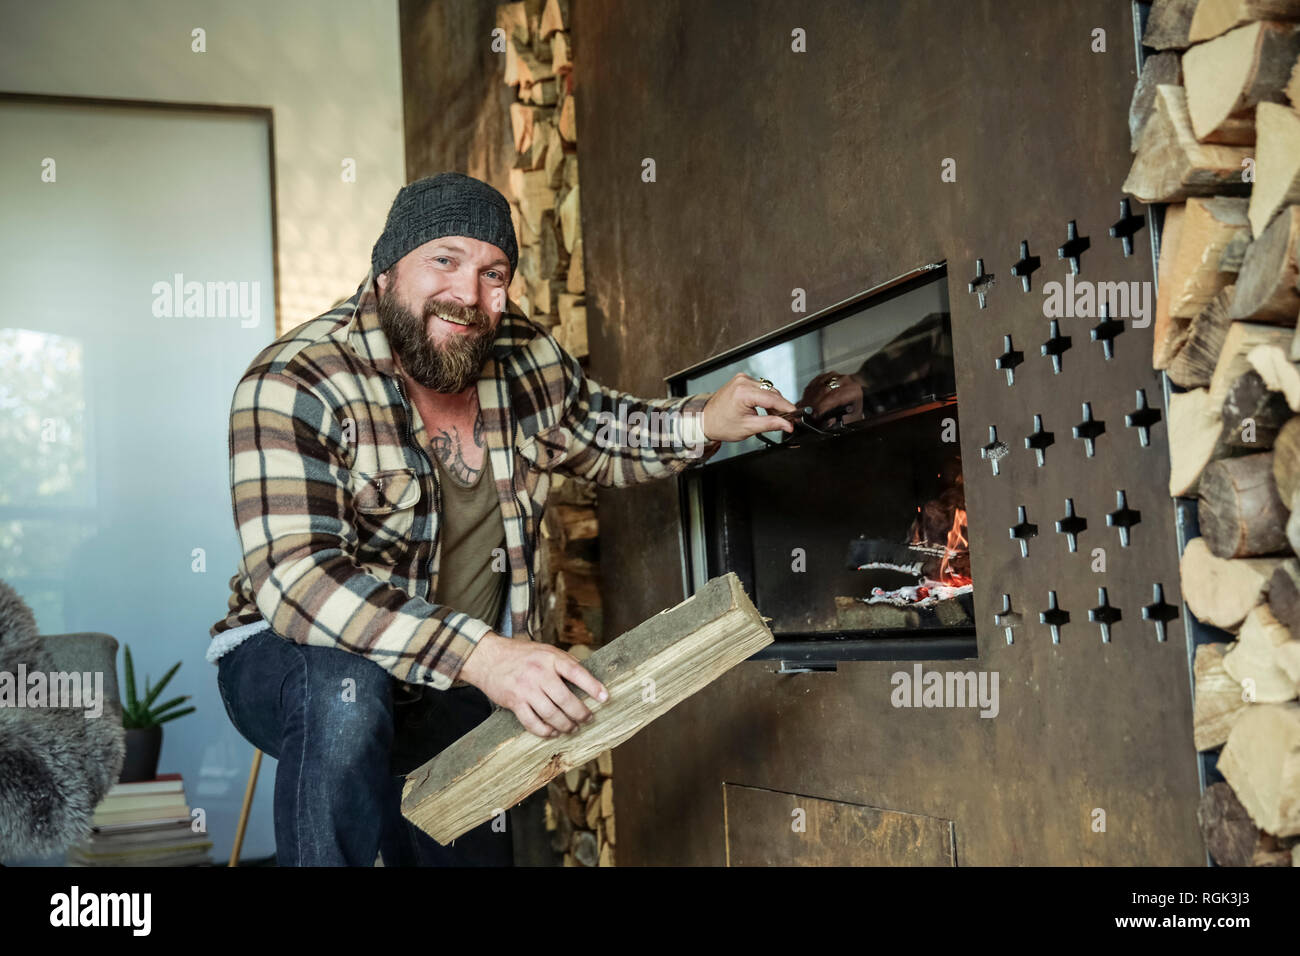 Portrait of bearded man lighting fireplace at home Stock Photo